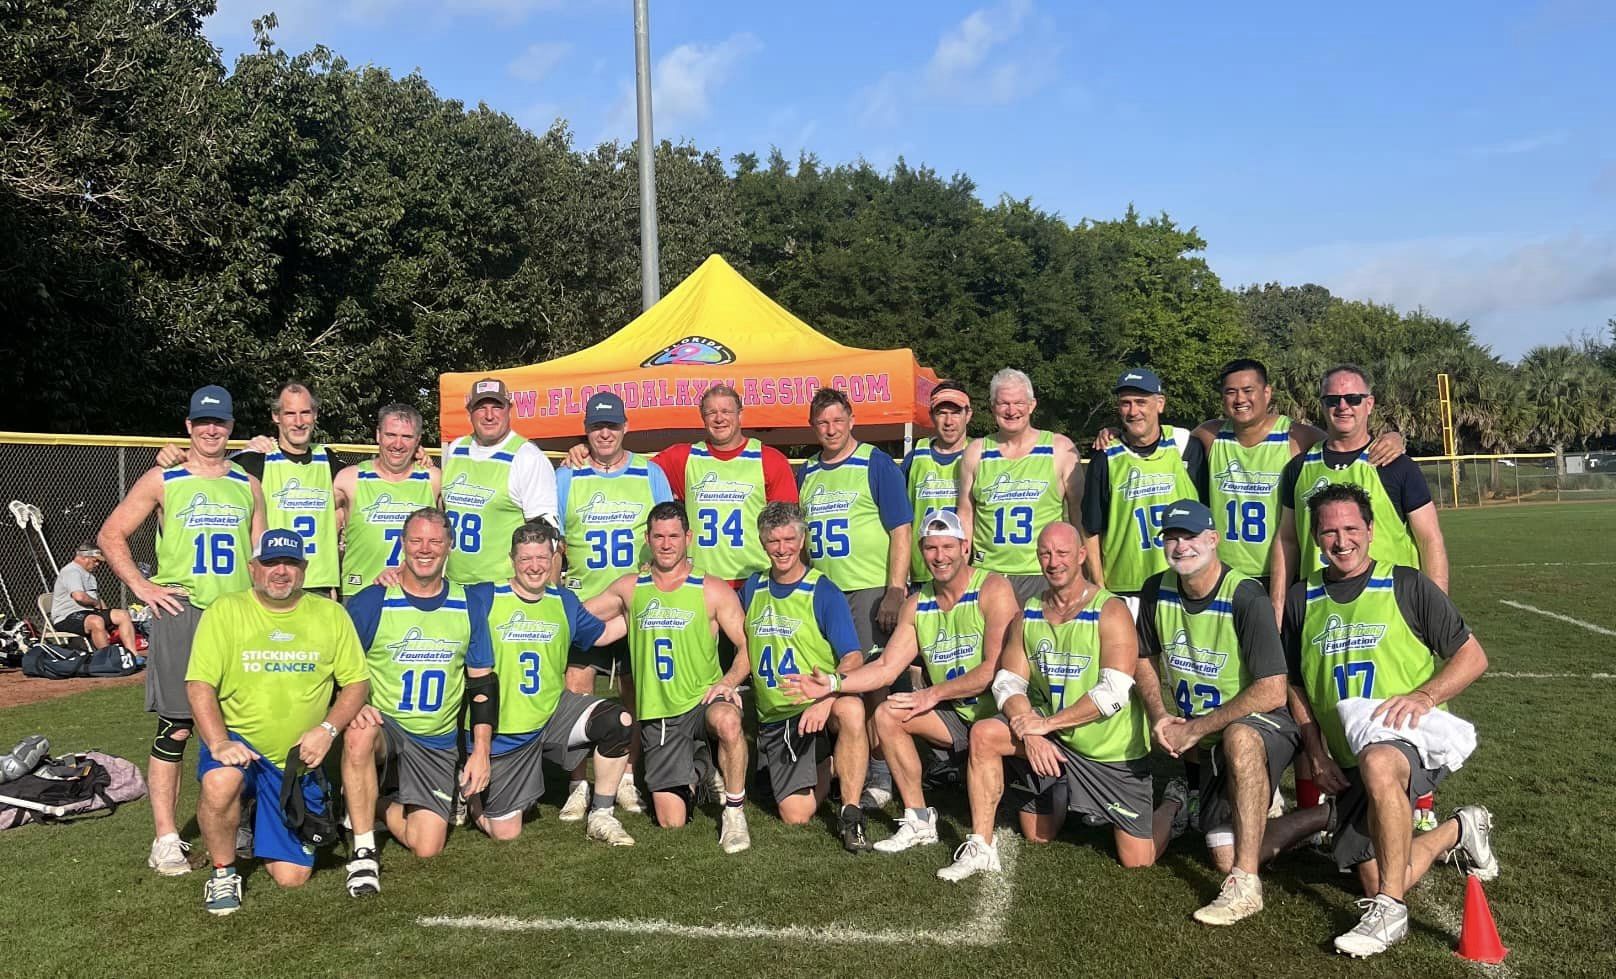 Attack Cancer Master’s Lacrosse Team Take The Field At Florida Lacrosse Classic For A Higher Purpose